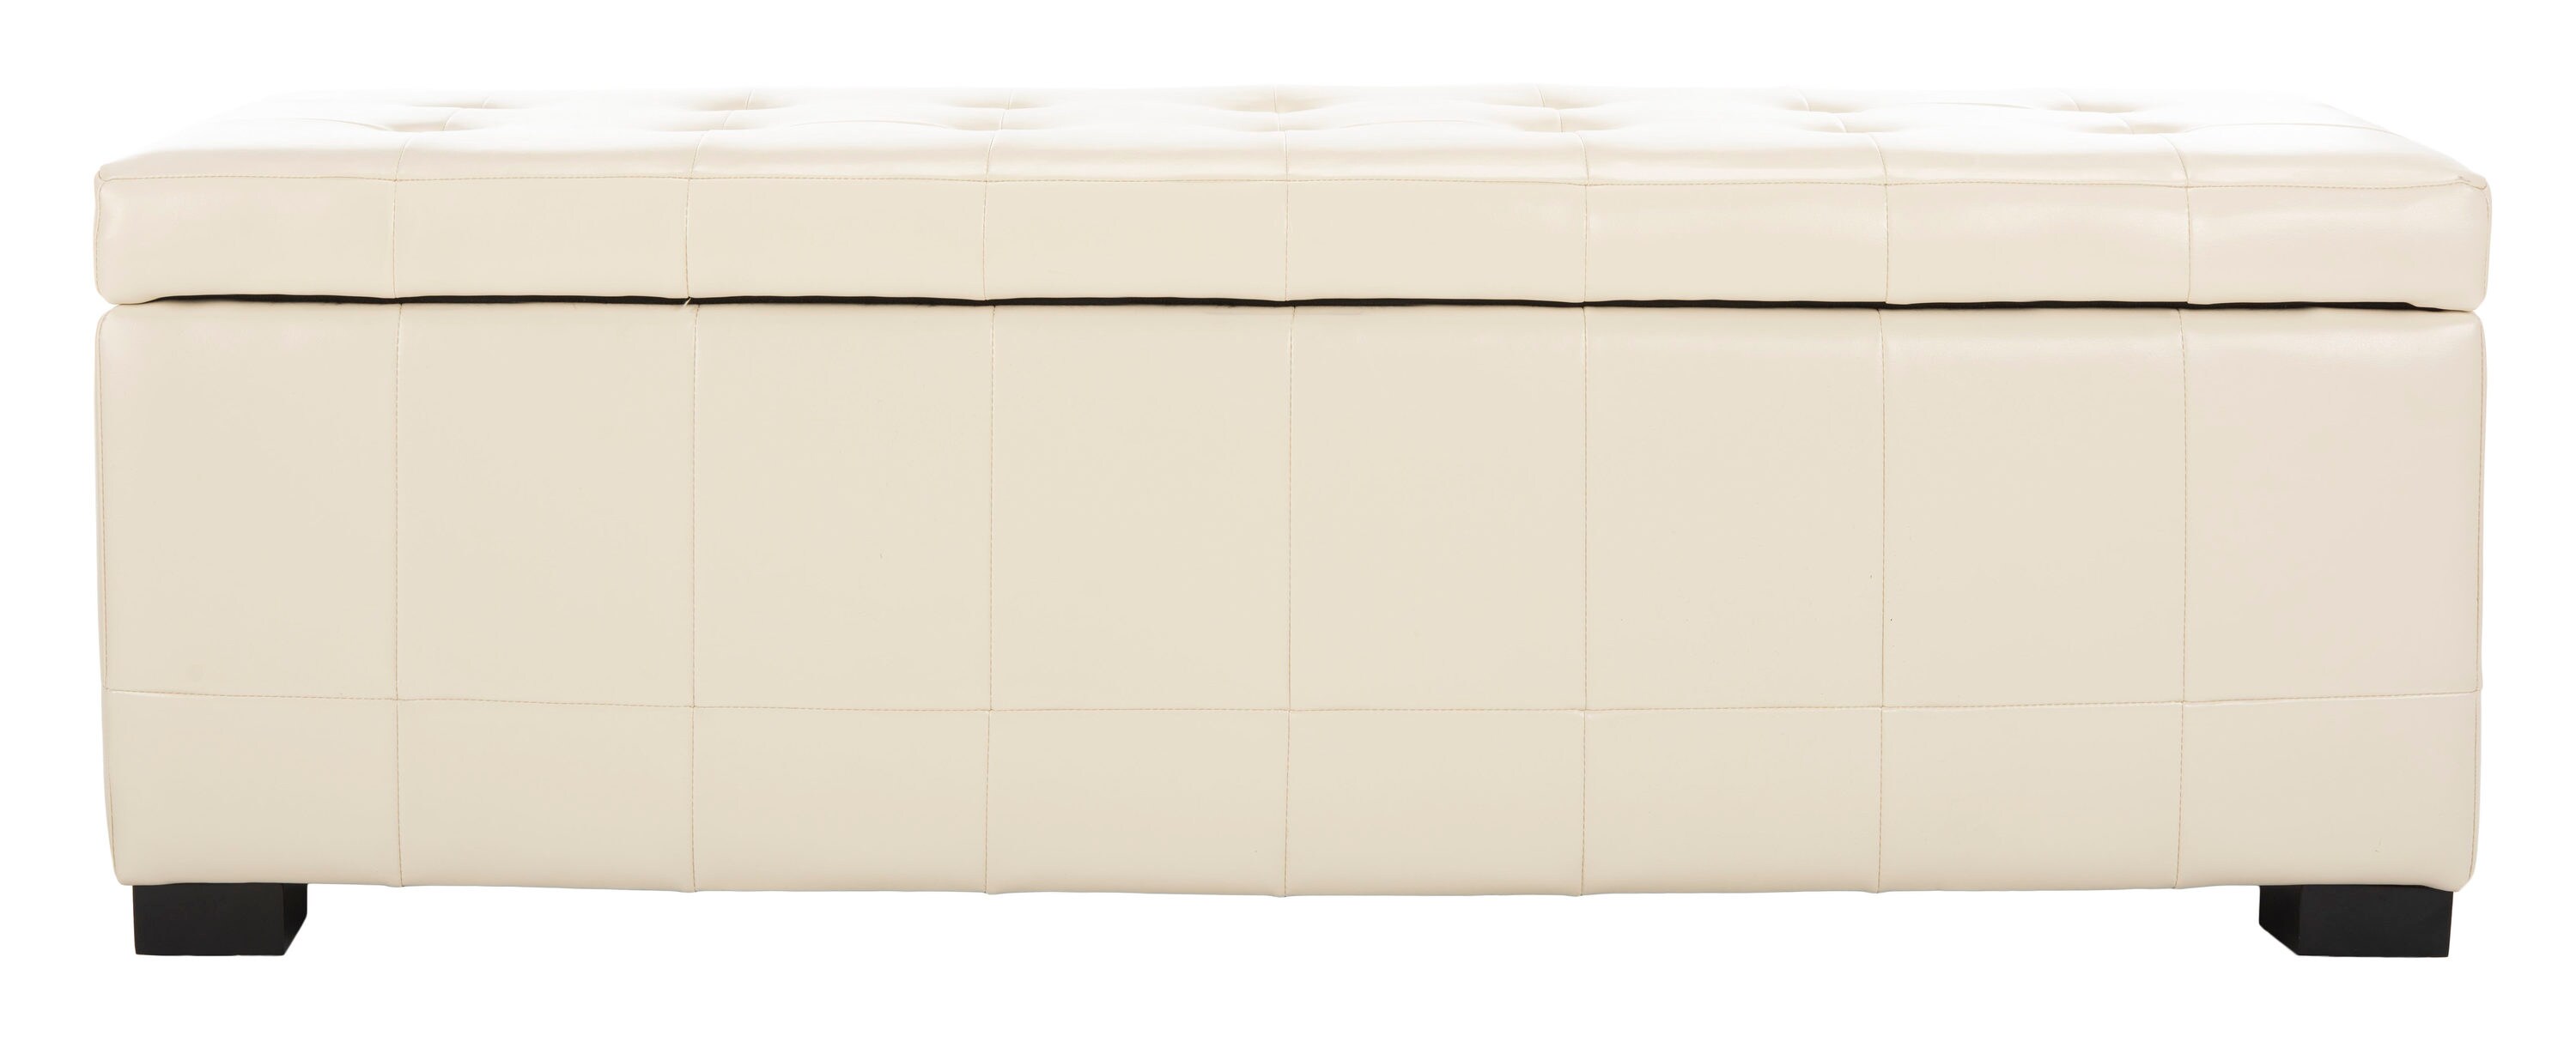 Off White Faux Leather Storage Ottoman, White Faux Leather Bench